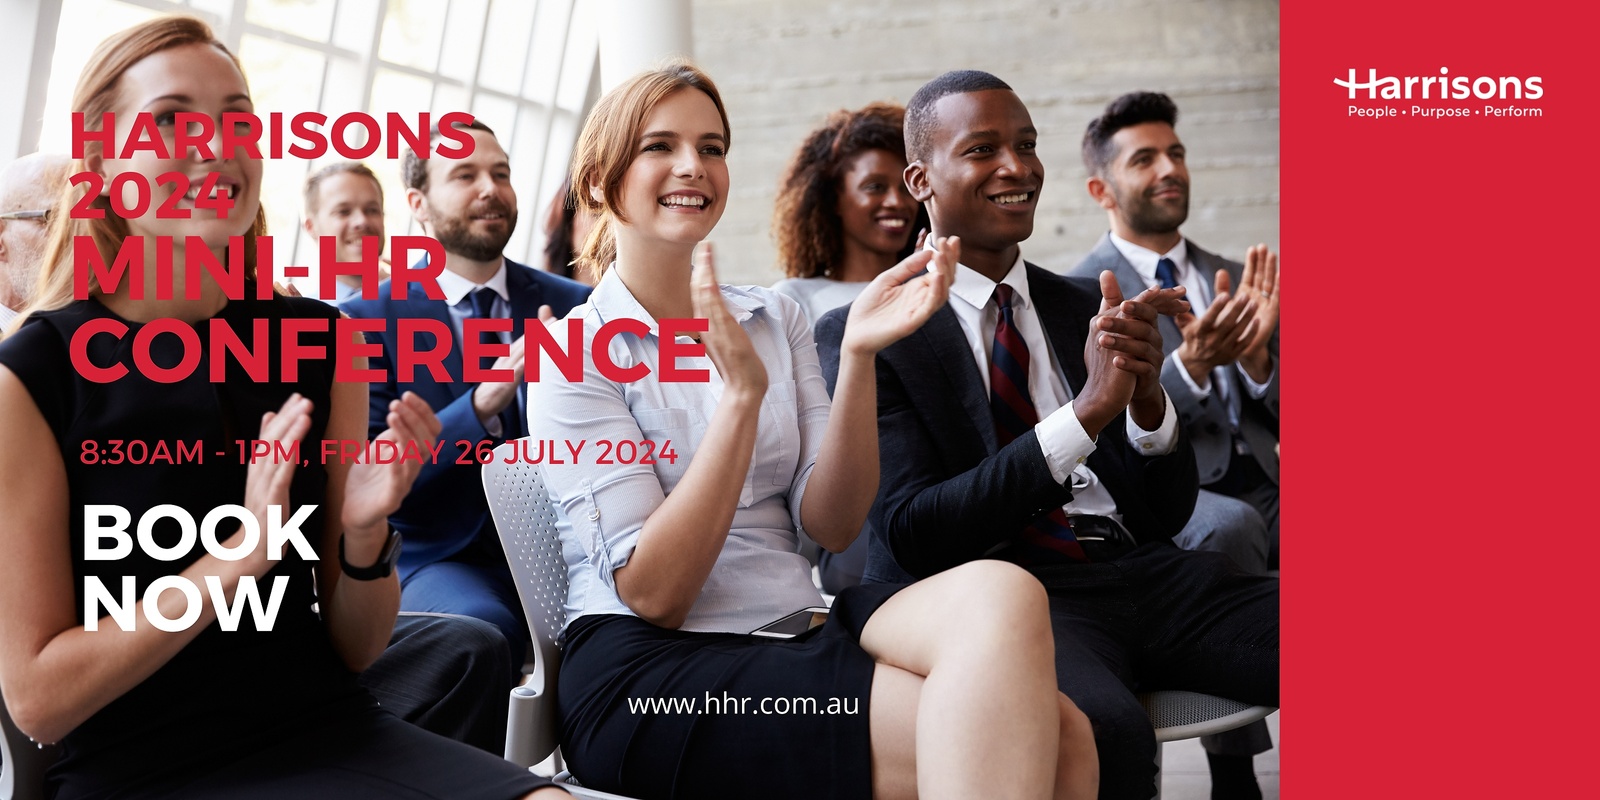 Banner image for Harrisons Mini-HR Conference for HR Consultants and Business Leaders